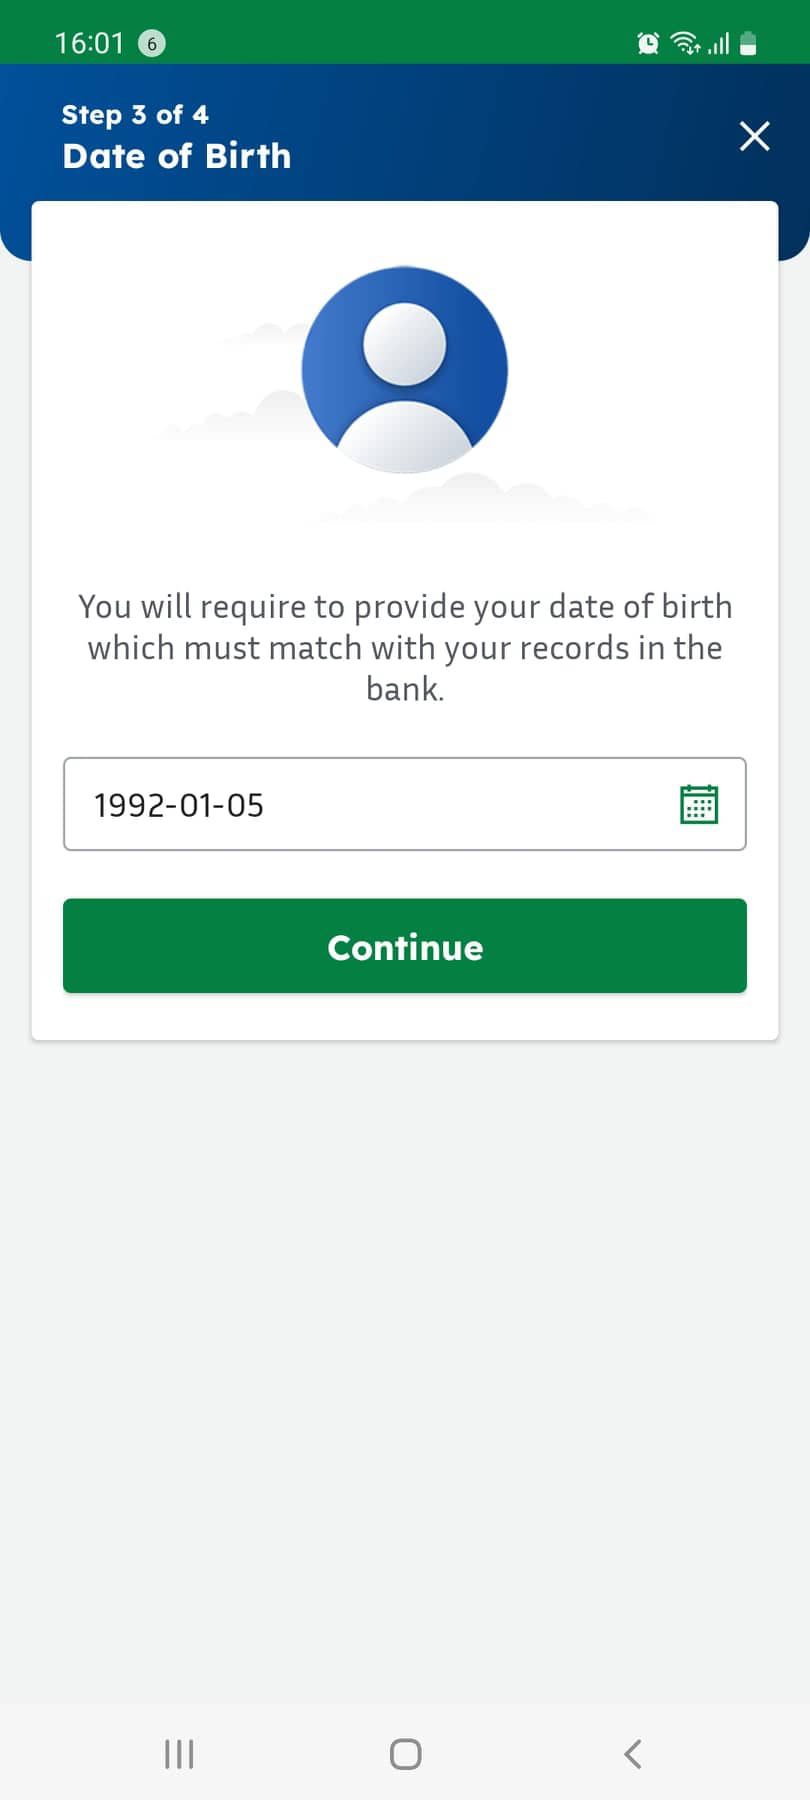 Enter Date of Birth - Image